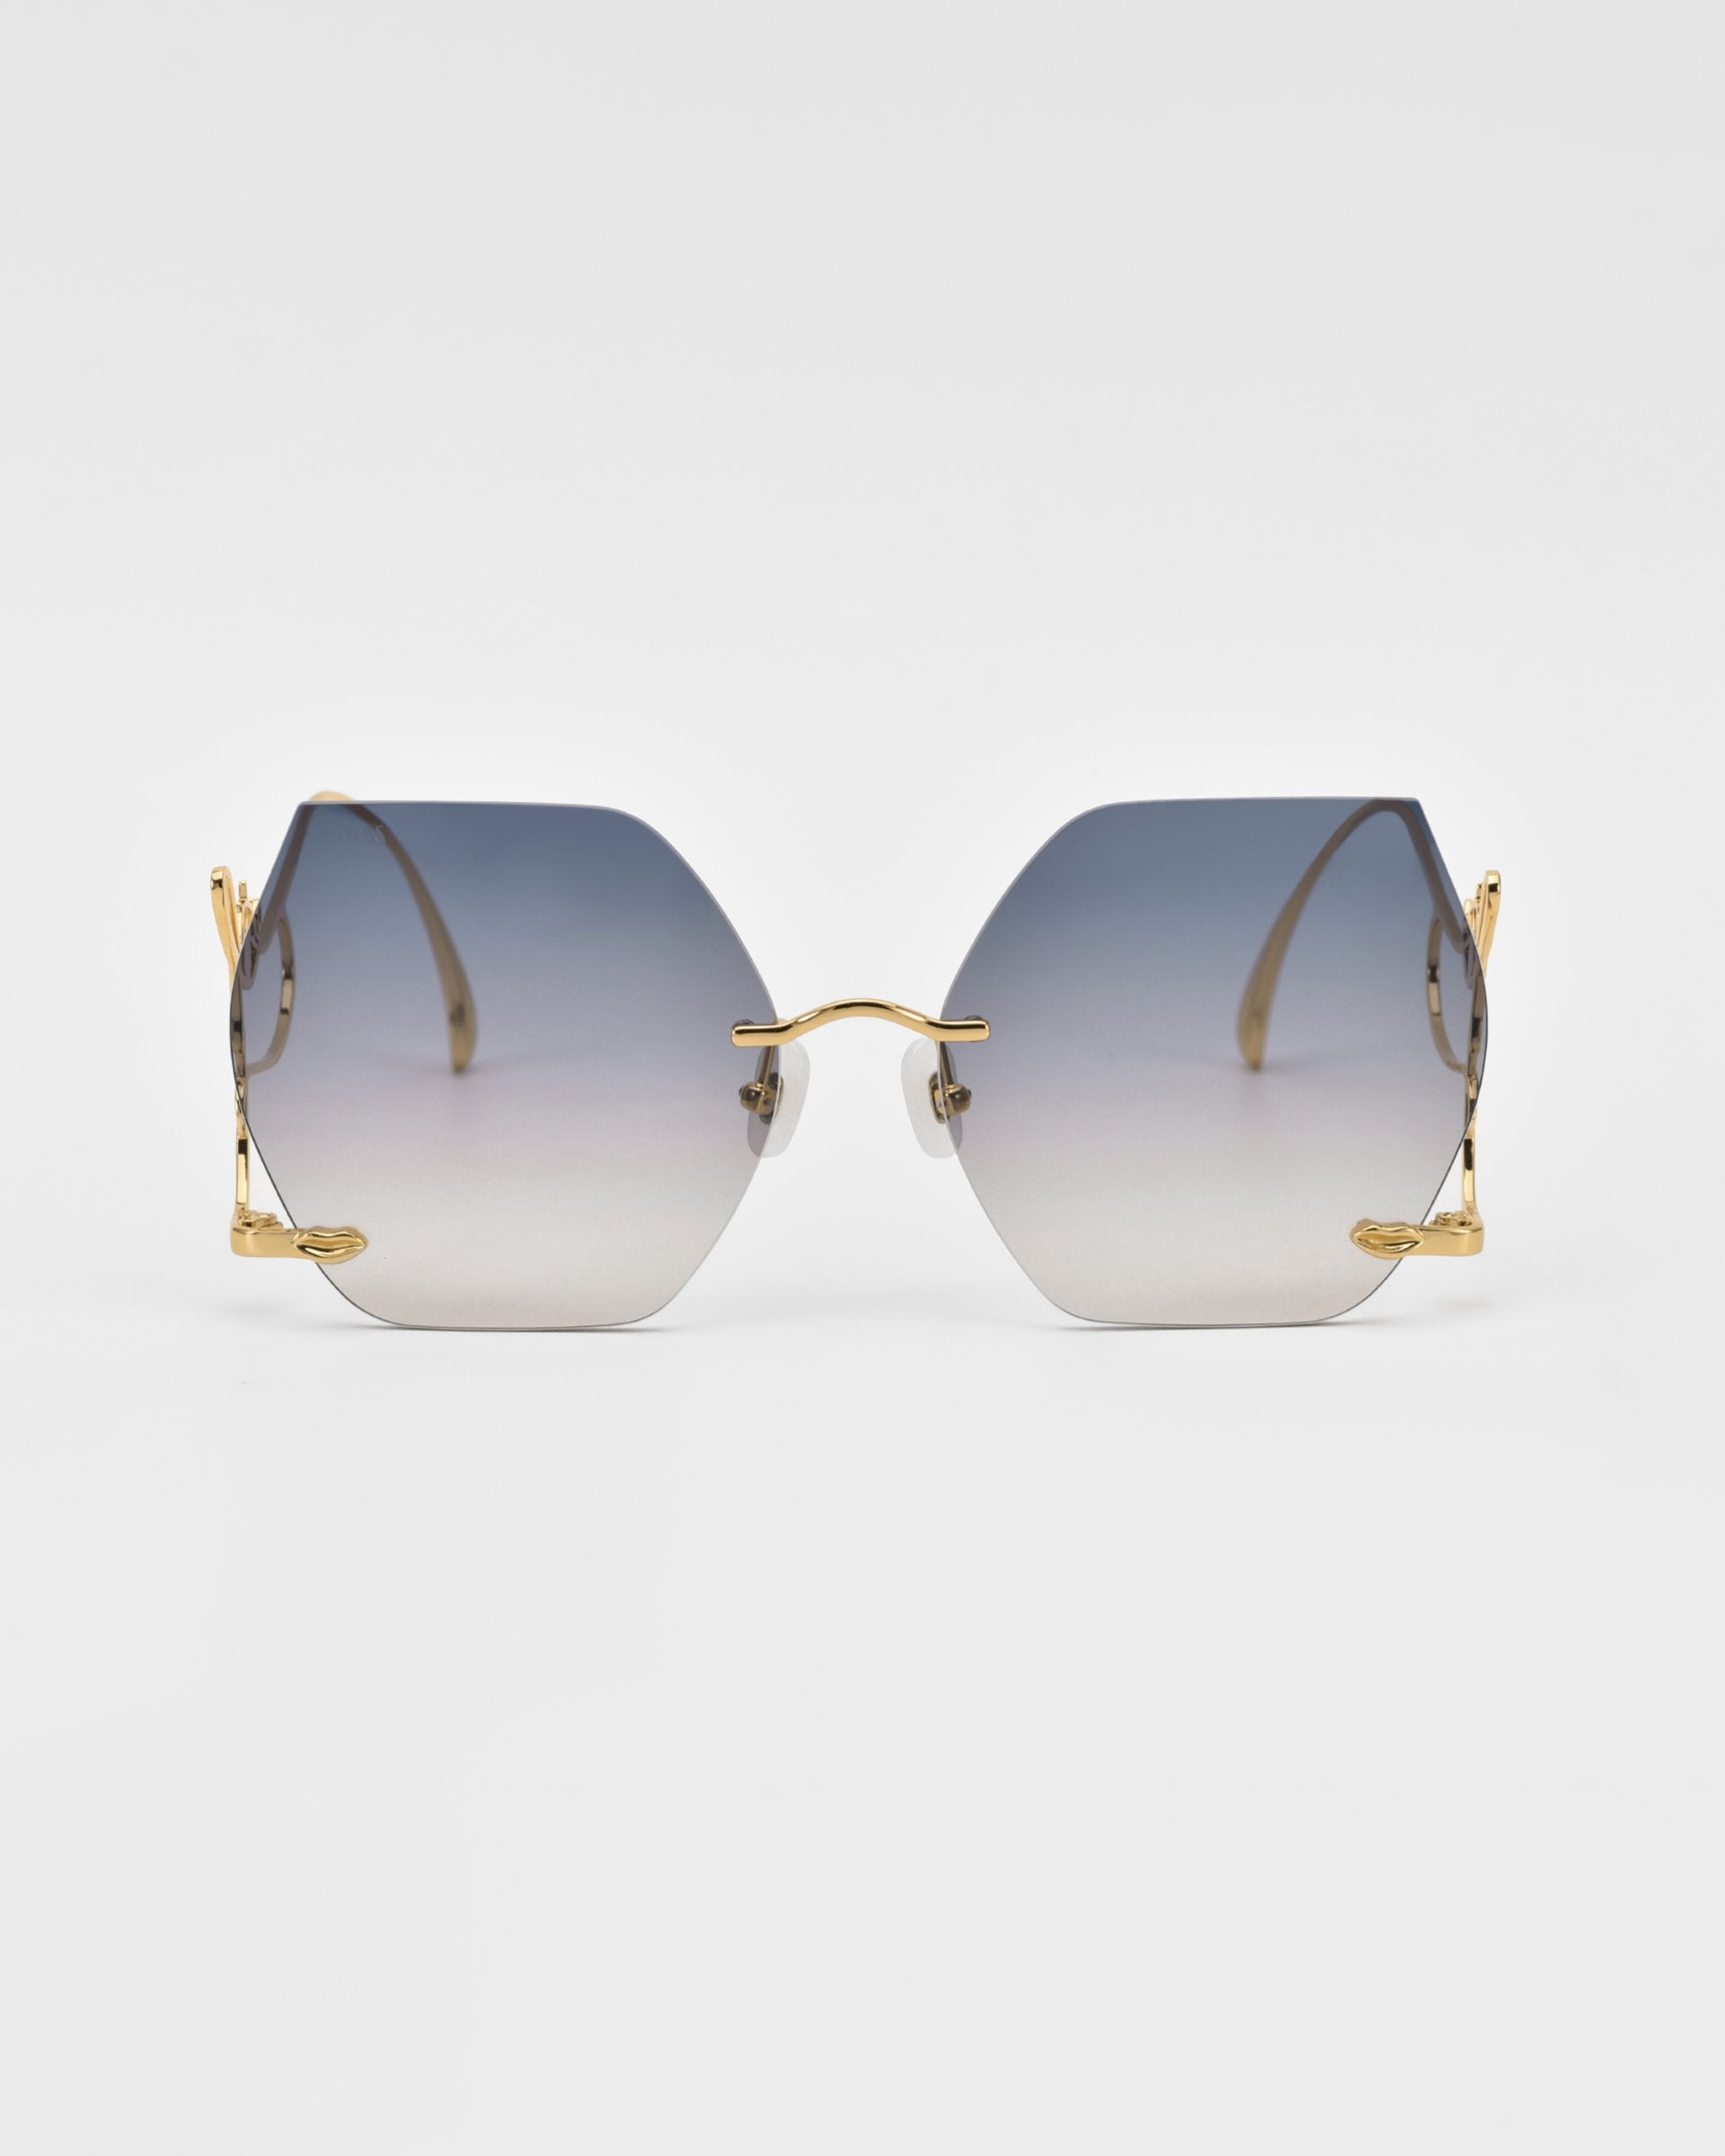 A pair of For Art&#39;s Sake® Cry Me a River hexagonal gradient sunglasses with gold frames is displayed against a plain white background. The lenses transition from dark at the top to nearly clear at the bottom, and the thin arms feature intricate detailing near the hinges.